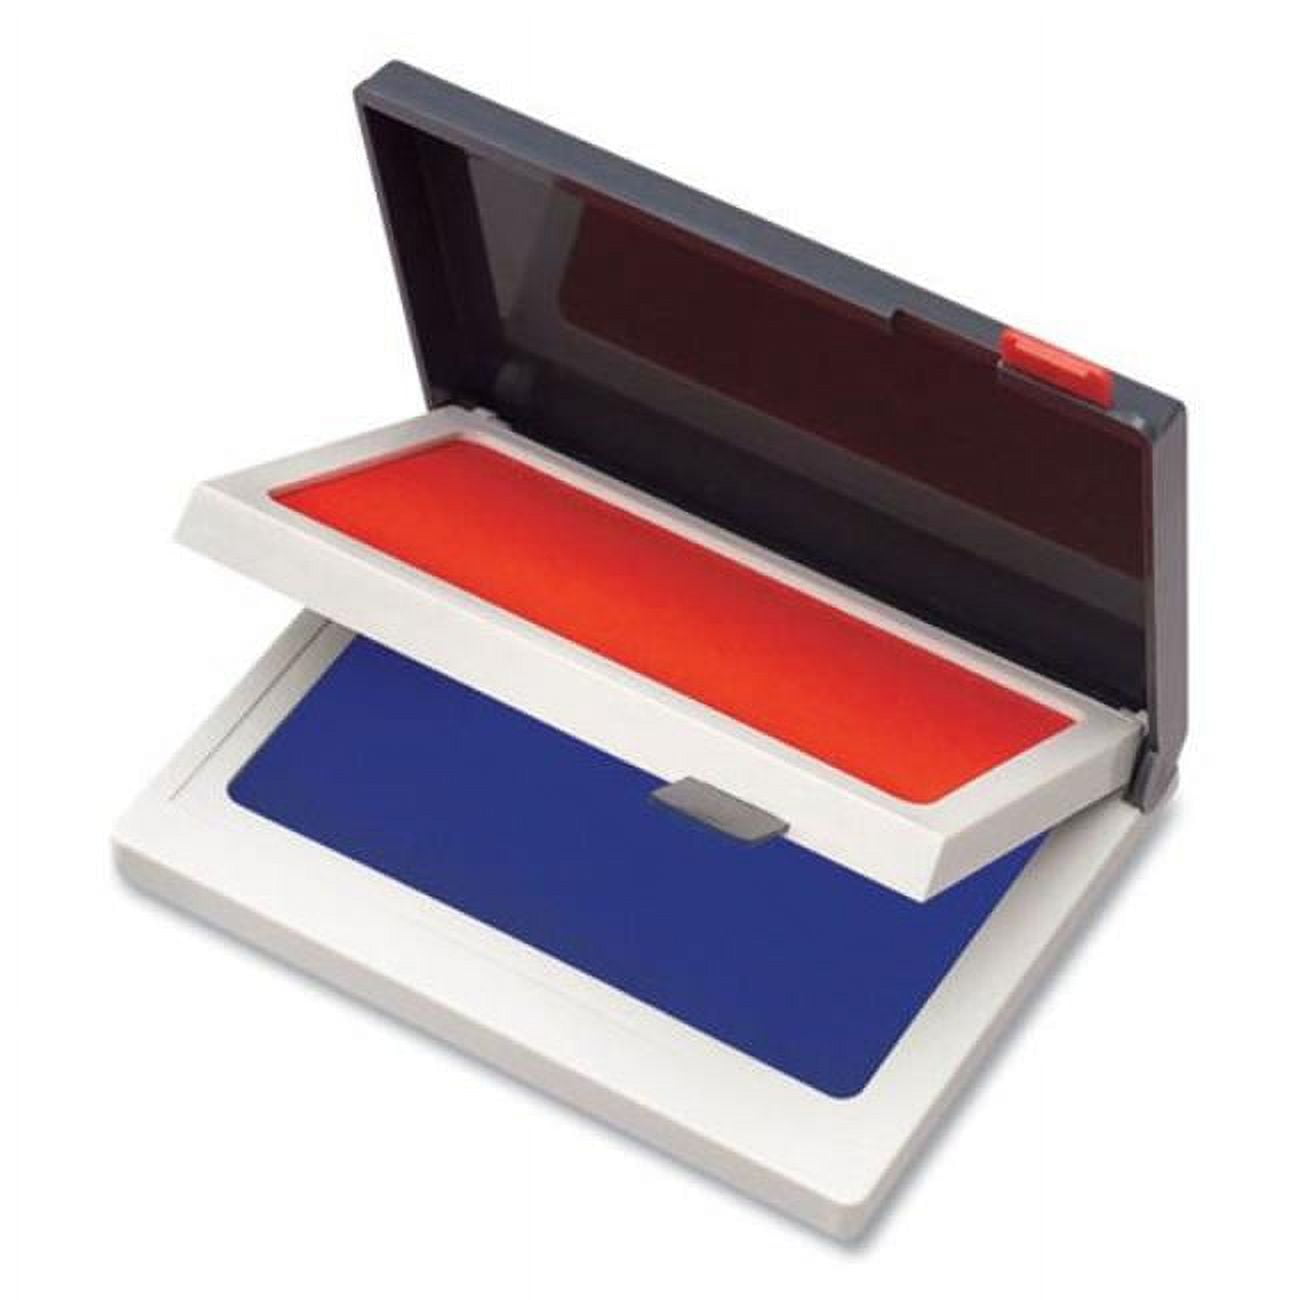 Cosco COS090429 2.75 x 4.25 in. Two-Color Felt Stamp Pads, Blue & Red 